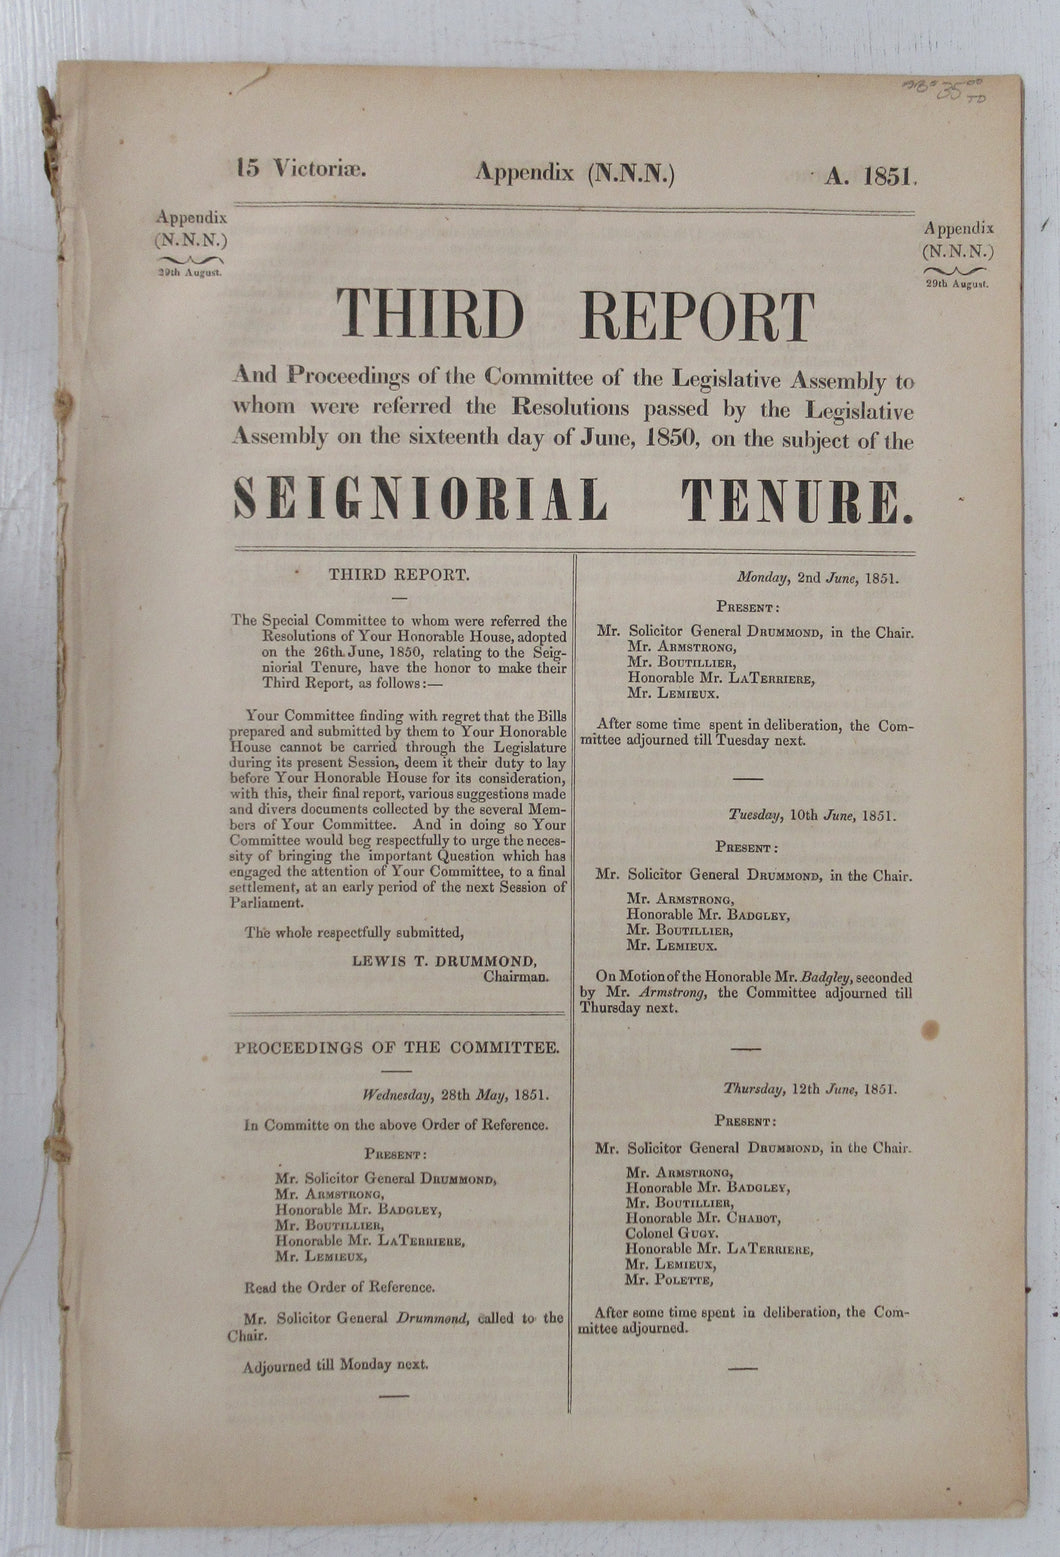 Third Report And Proceedings of the Committee of the Legislative Assembly to whom were referred the Resolutions passed by the Legislative Assembly on the sixteenth day of June, 1850, on the subject of Seigniorial Tenure